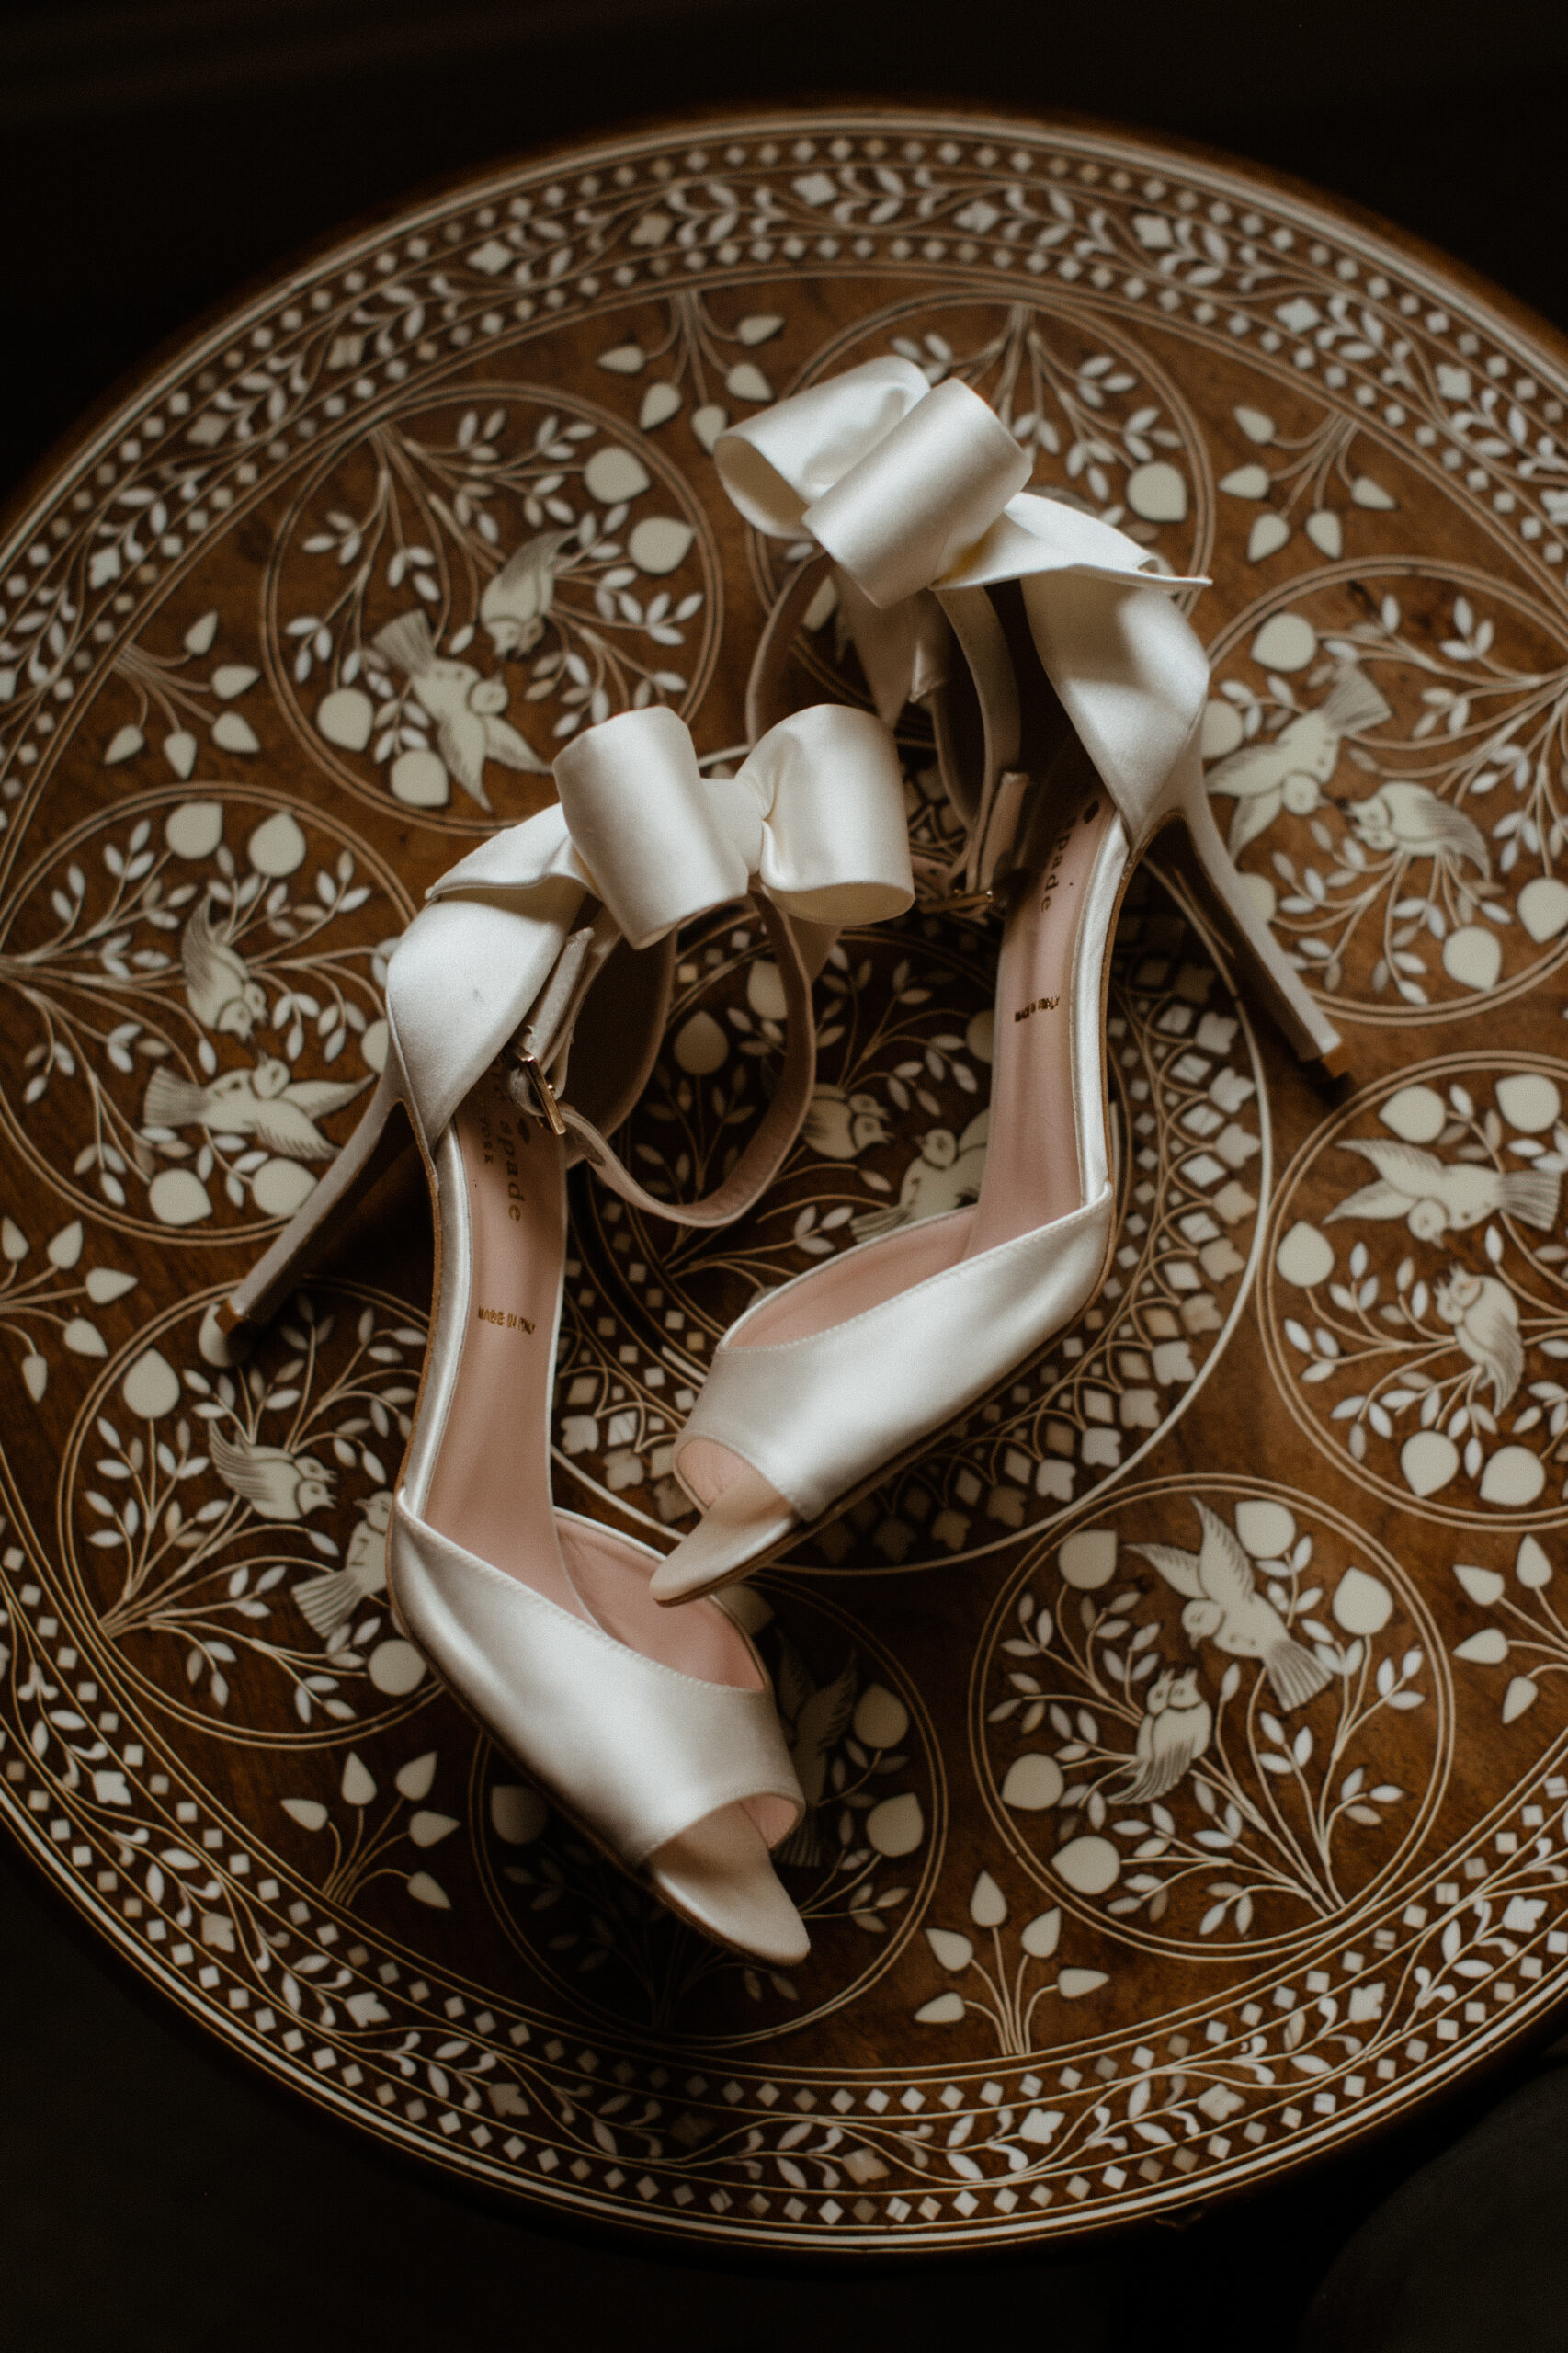 brides shoes lie on the floor ready for the dreamy New York wedding day